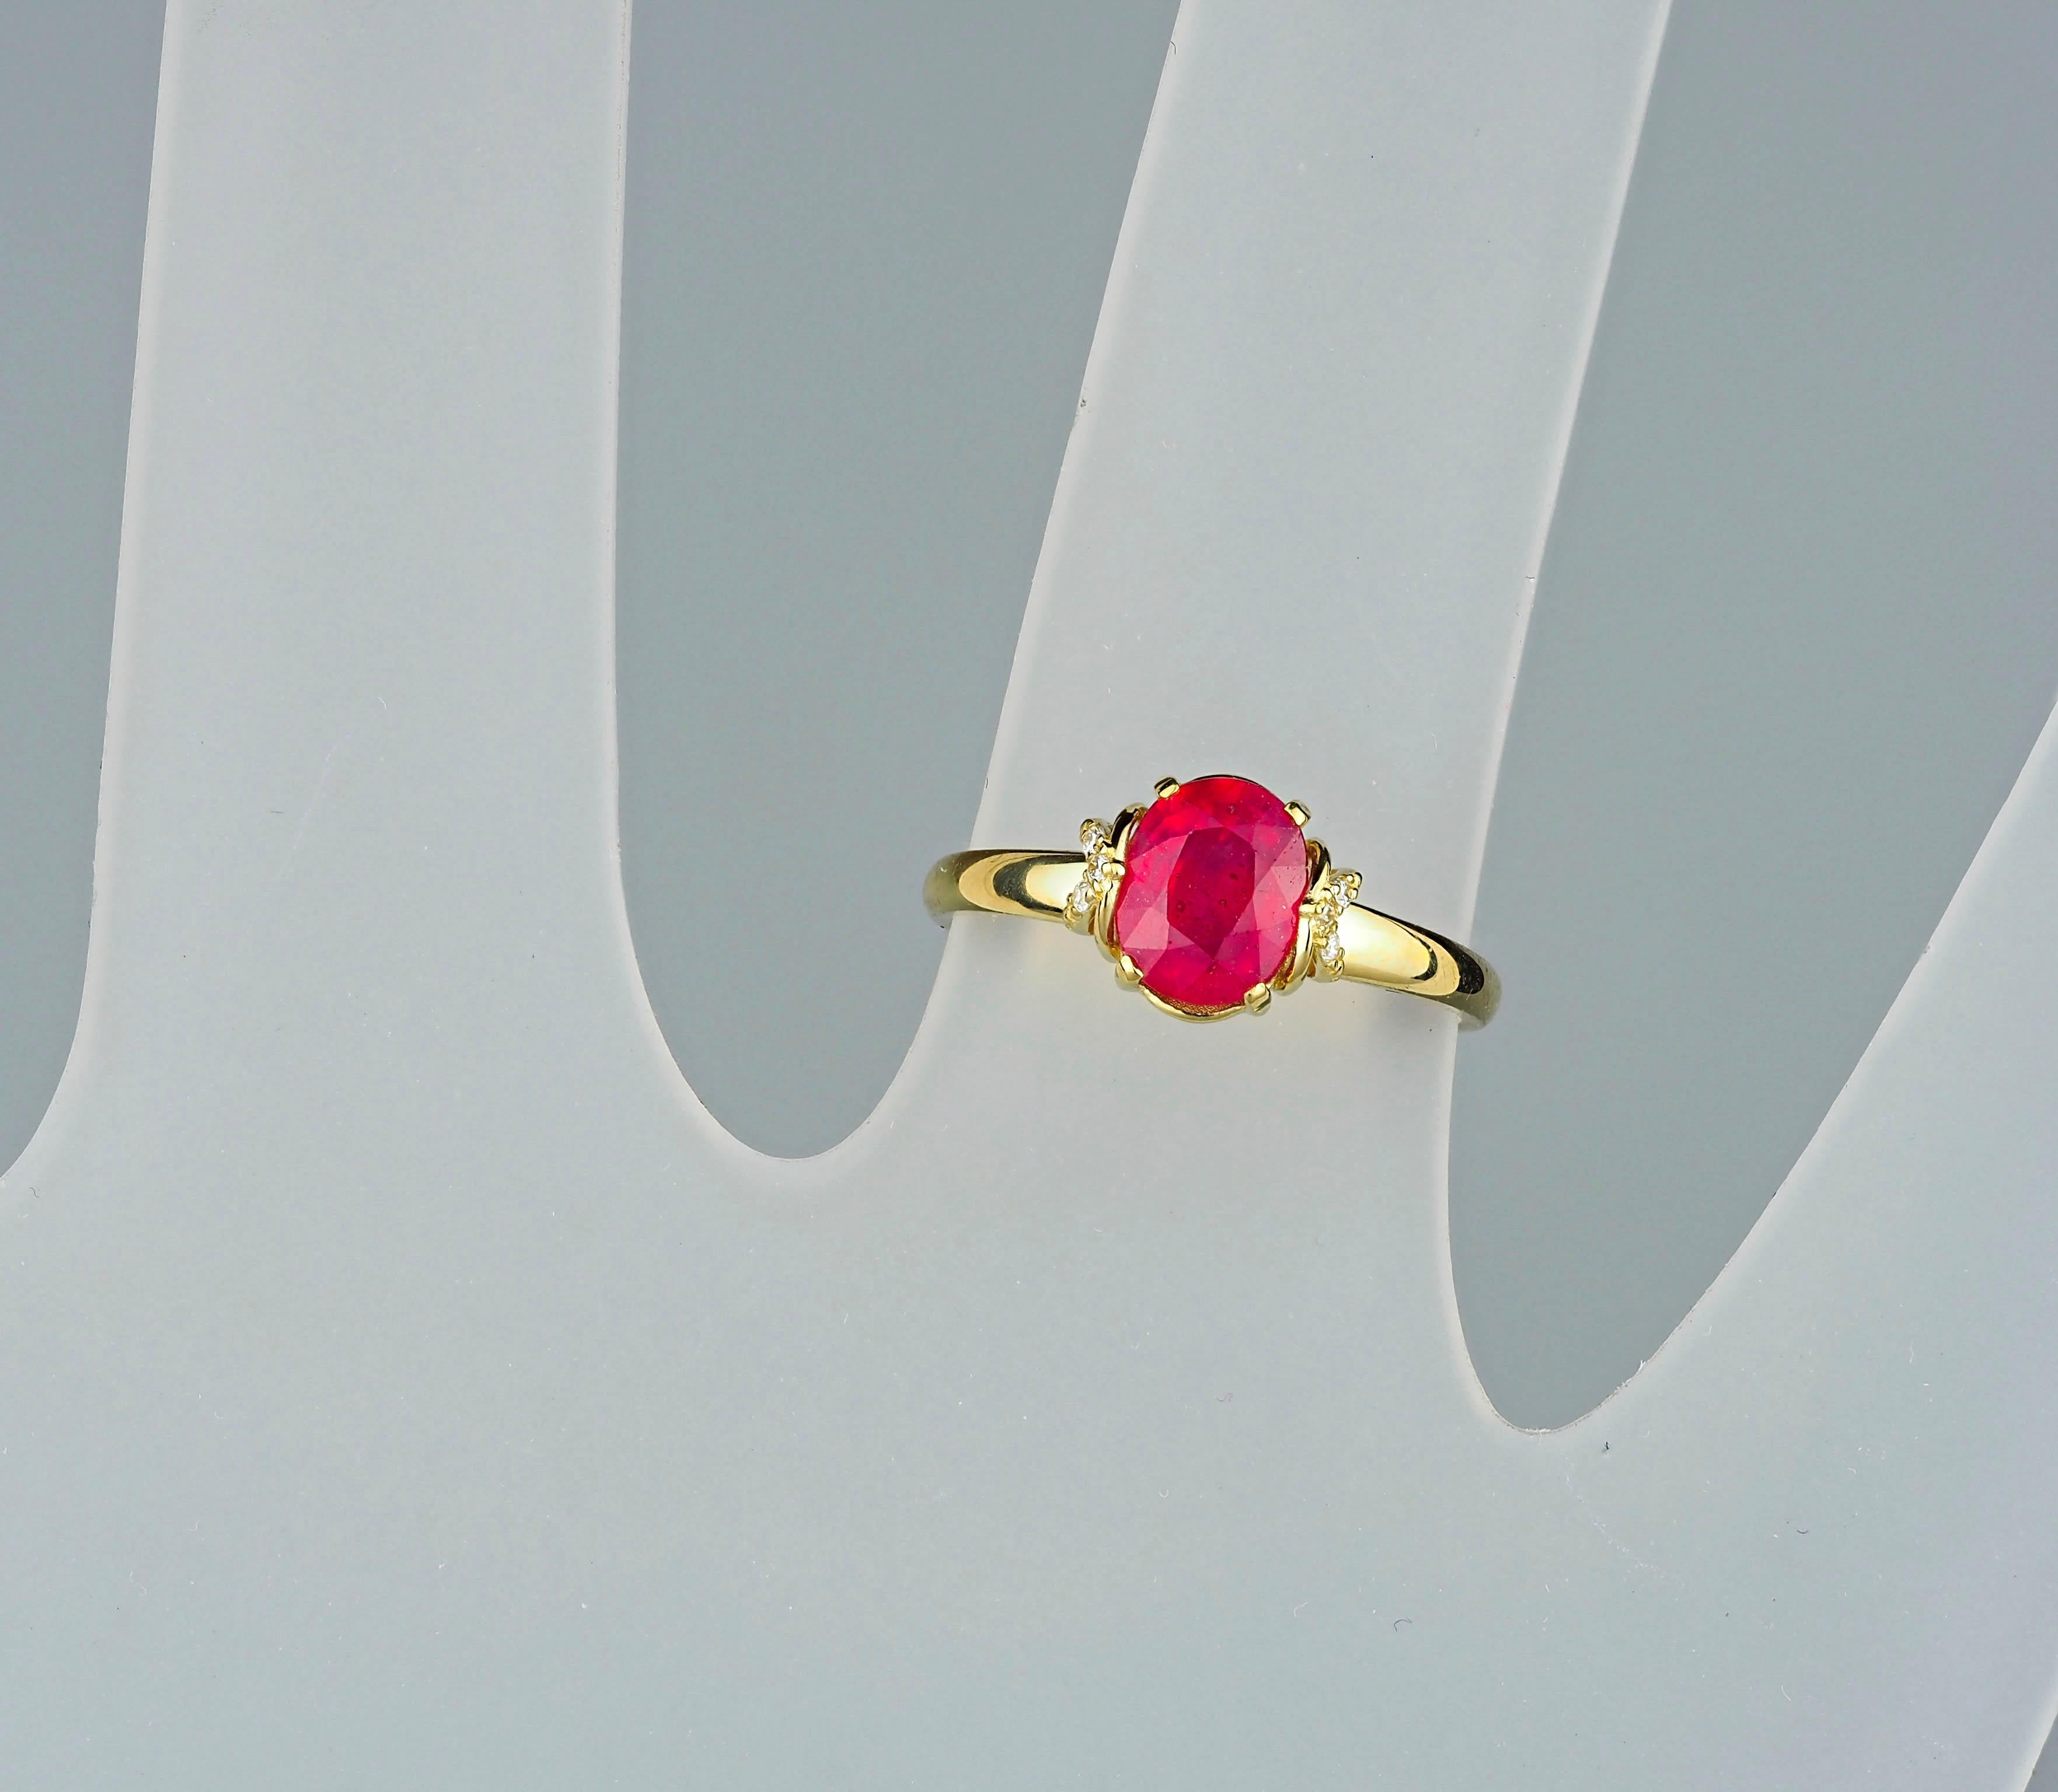 14 Karat Gold Ring with Ruby and Diamonds, Oval Ruby Ring 7